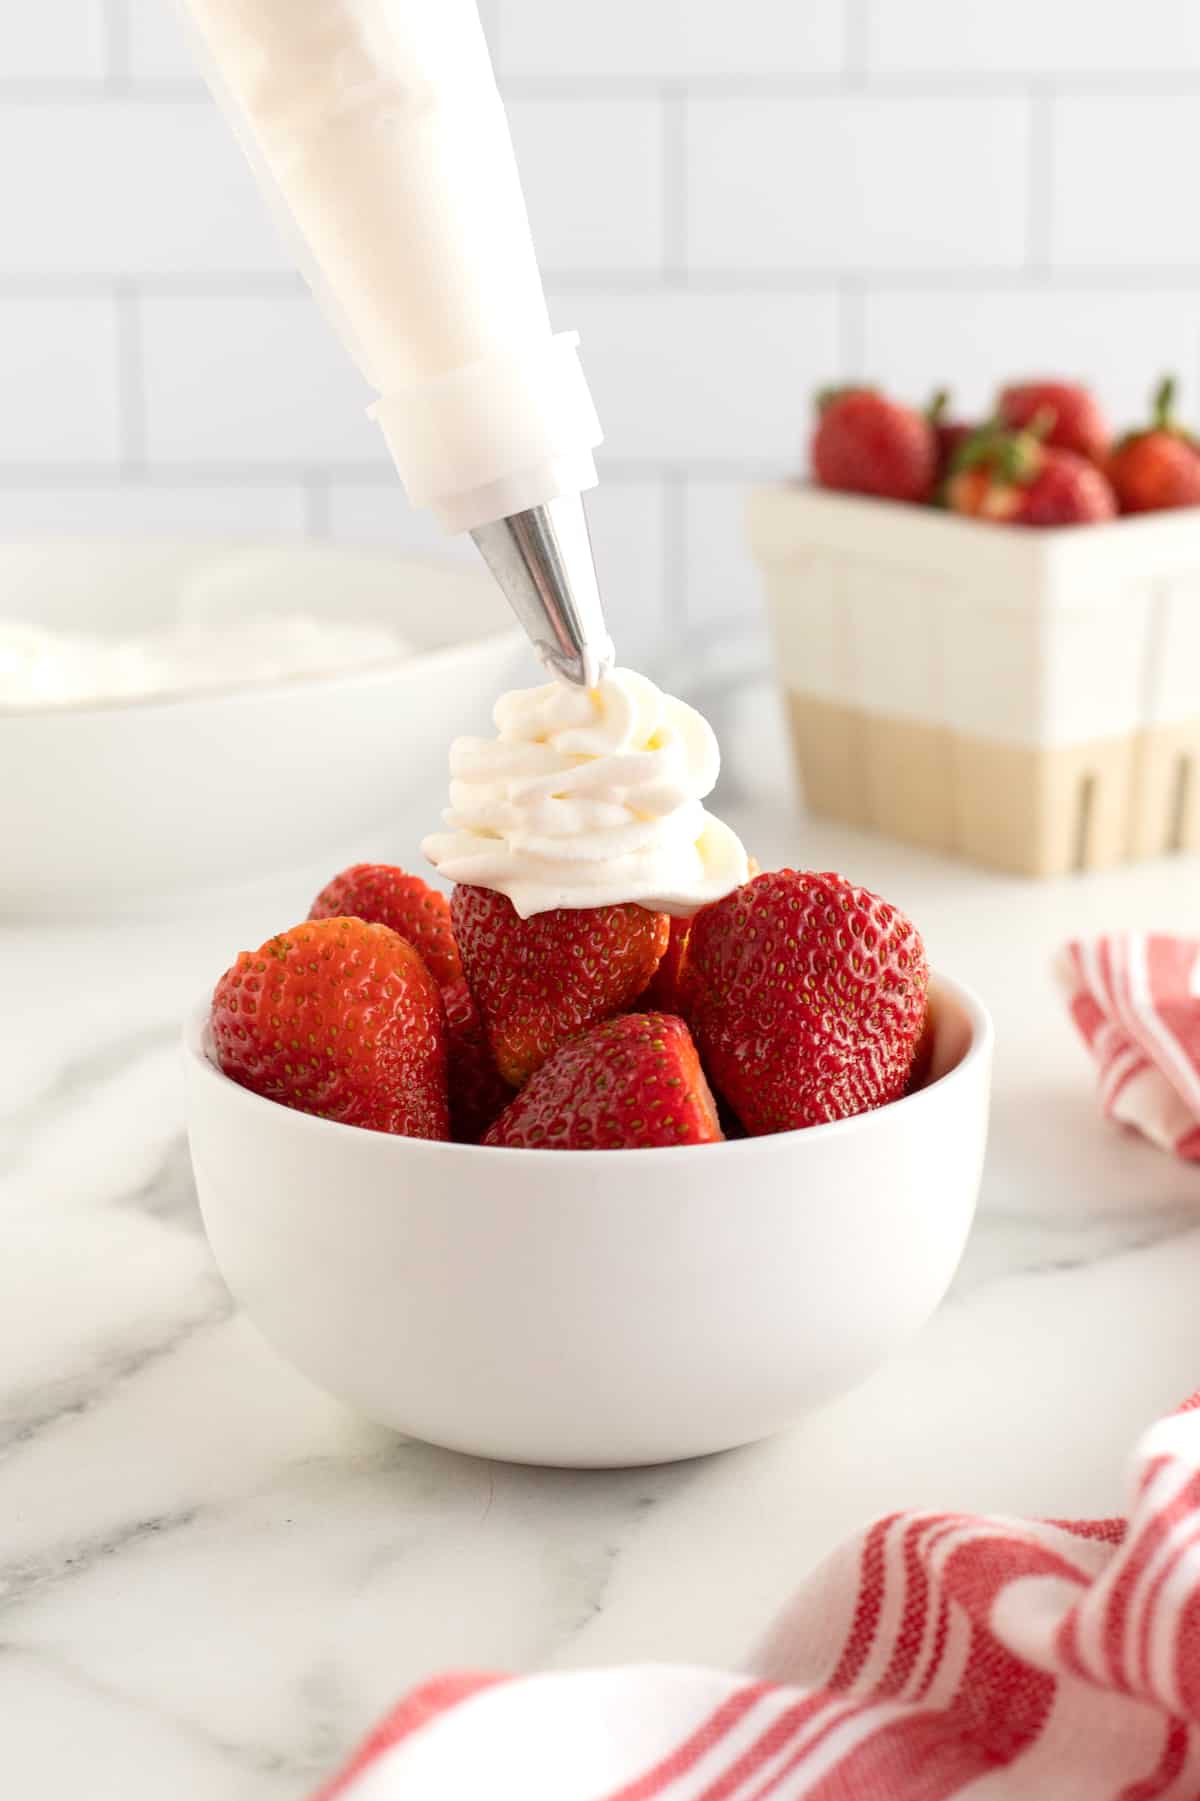 How to Make Homemade Whipped Cream by The BakerMama